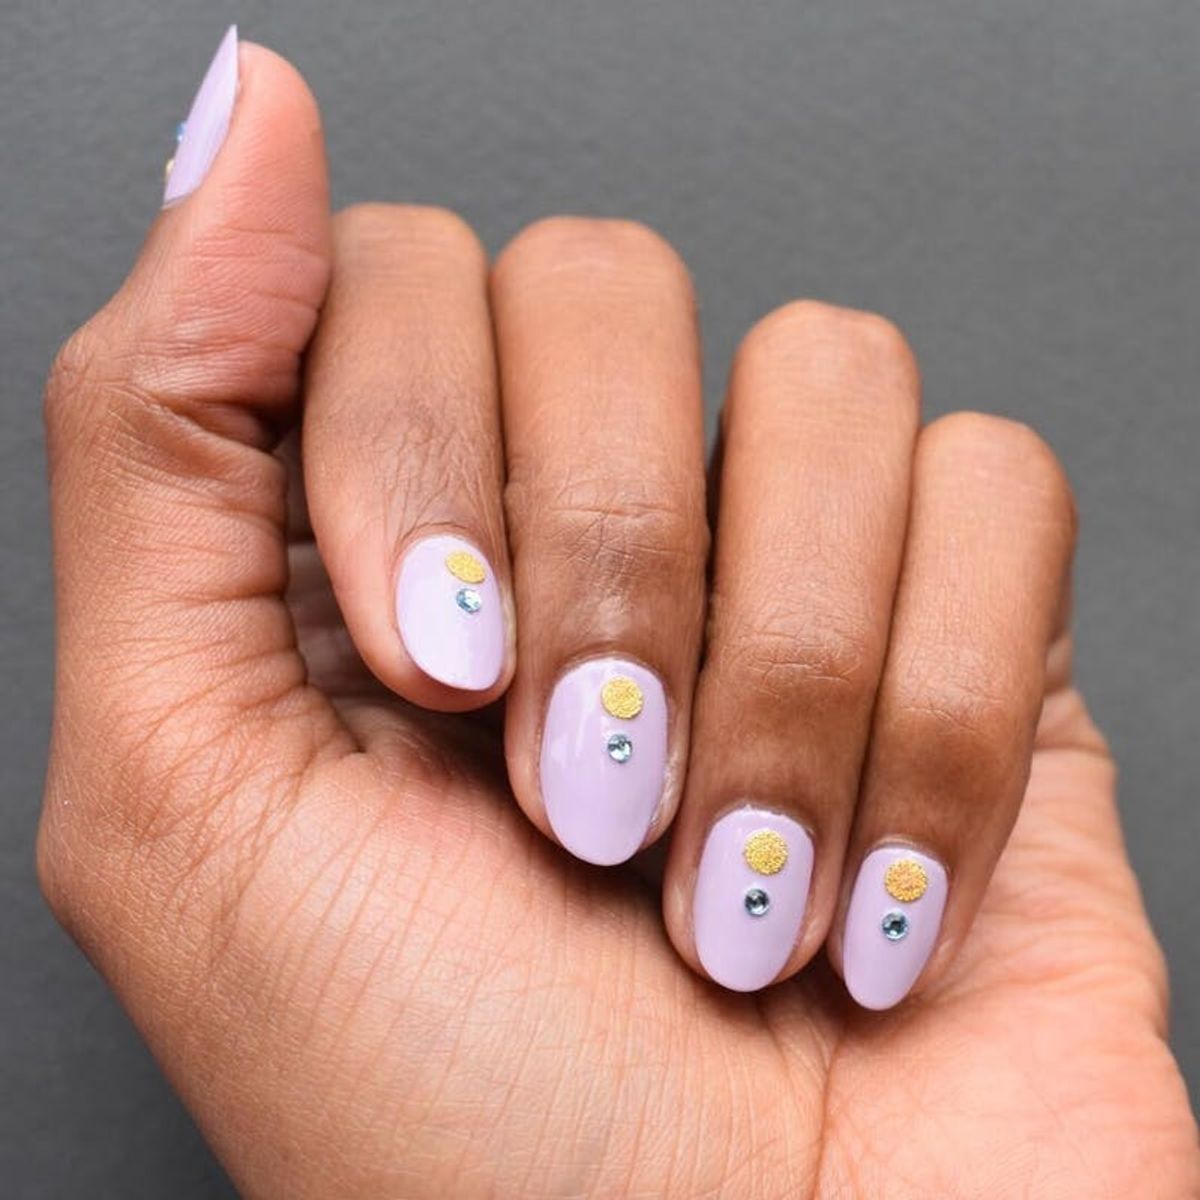 How to Bedazzle Nails in the Most Modern Way